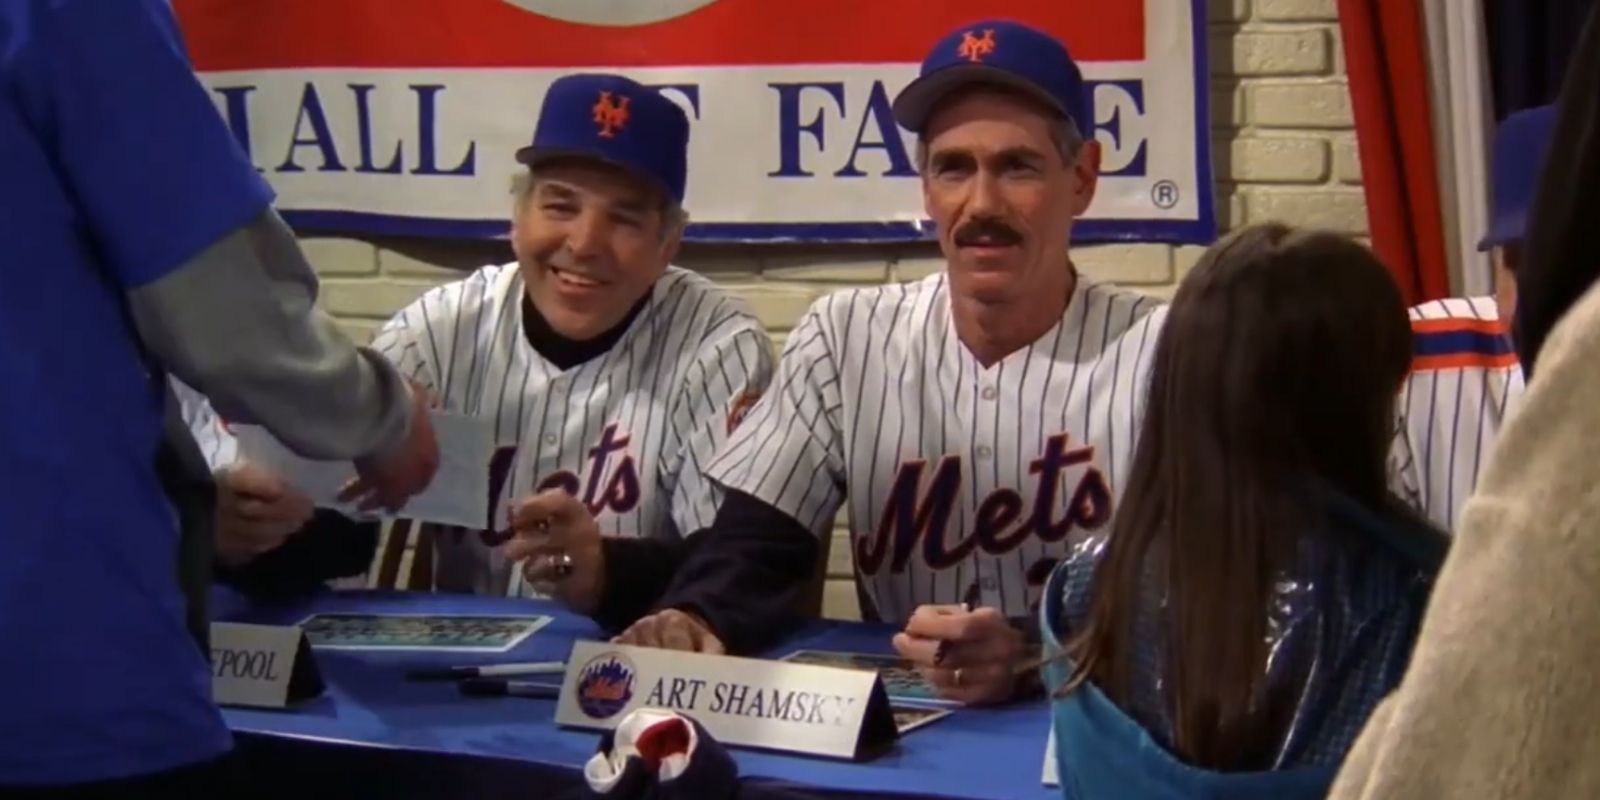 Art Shamsky sits with the New York Mets team at the Baseball Hall of Fame in Everybody Loves Raymond